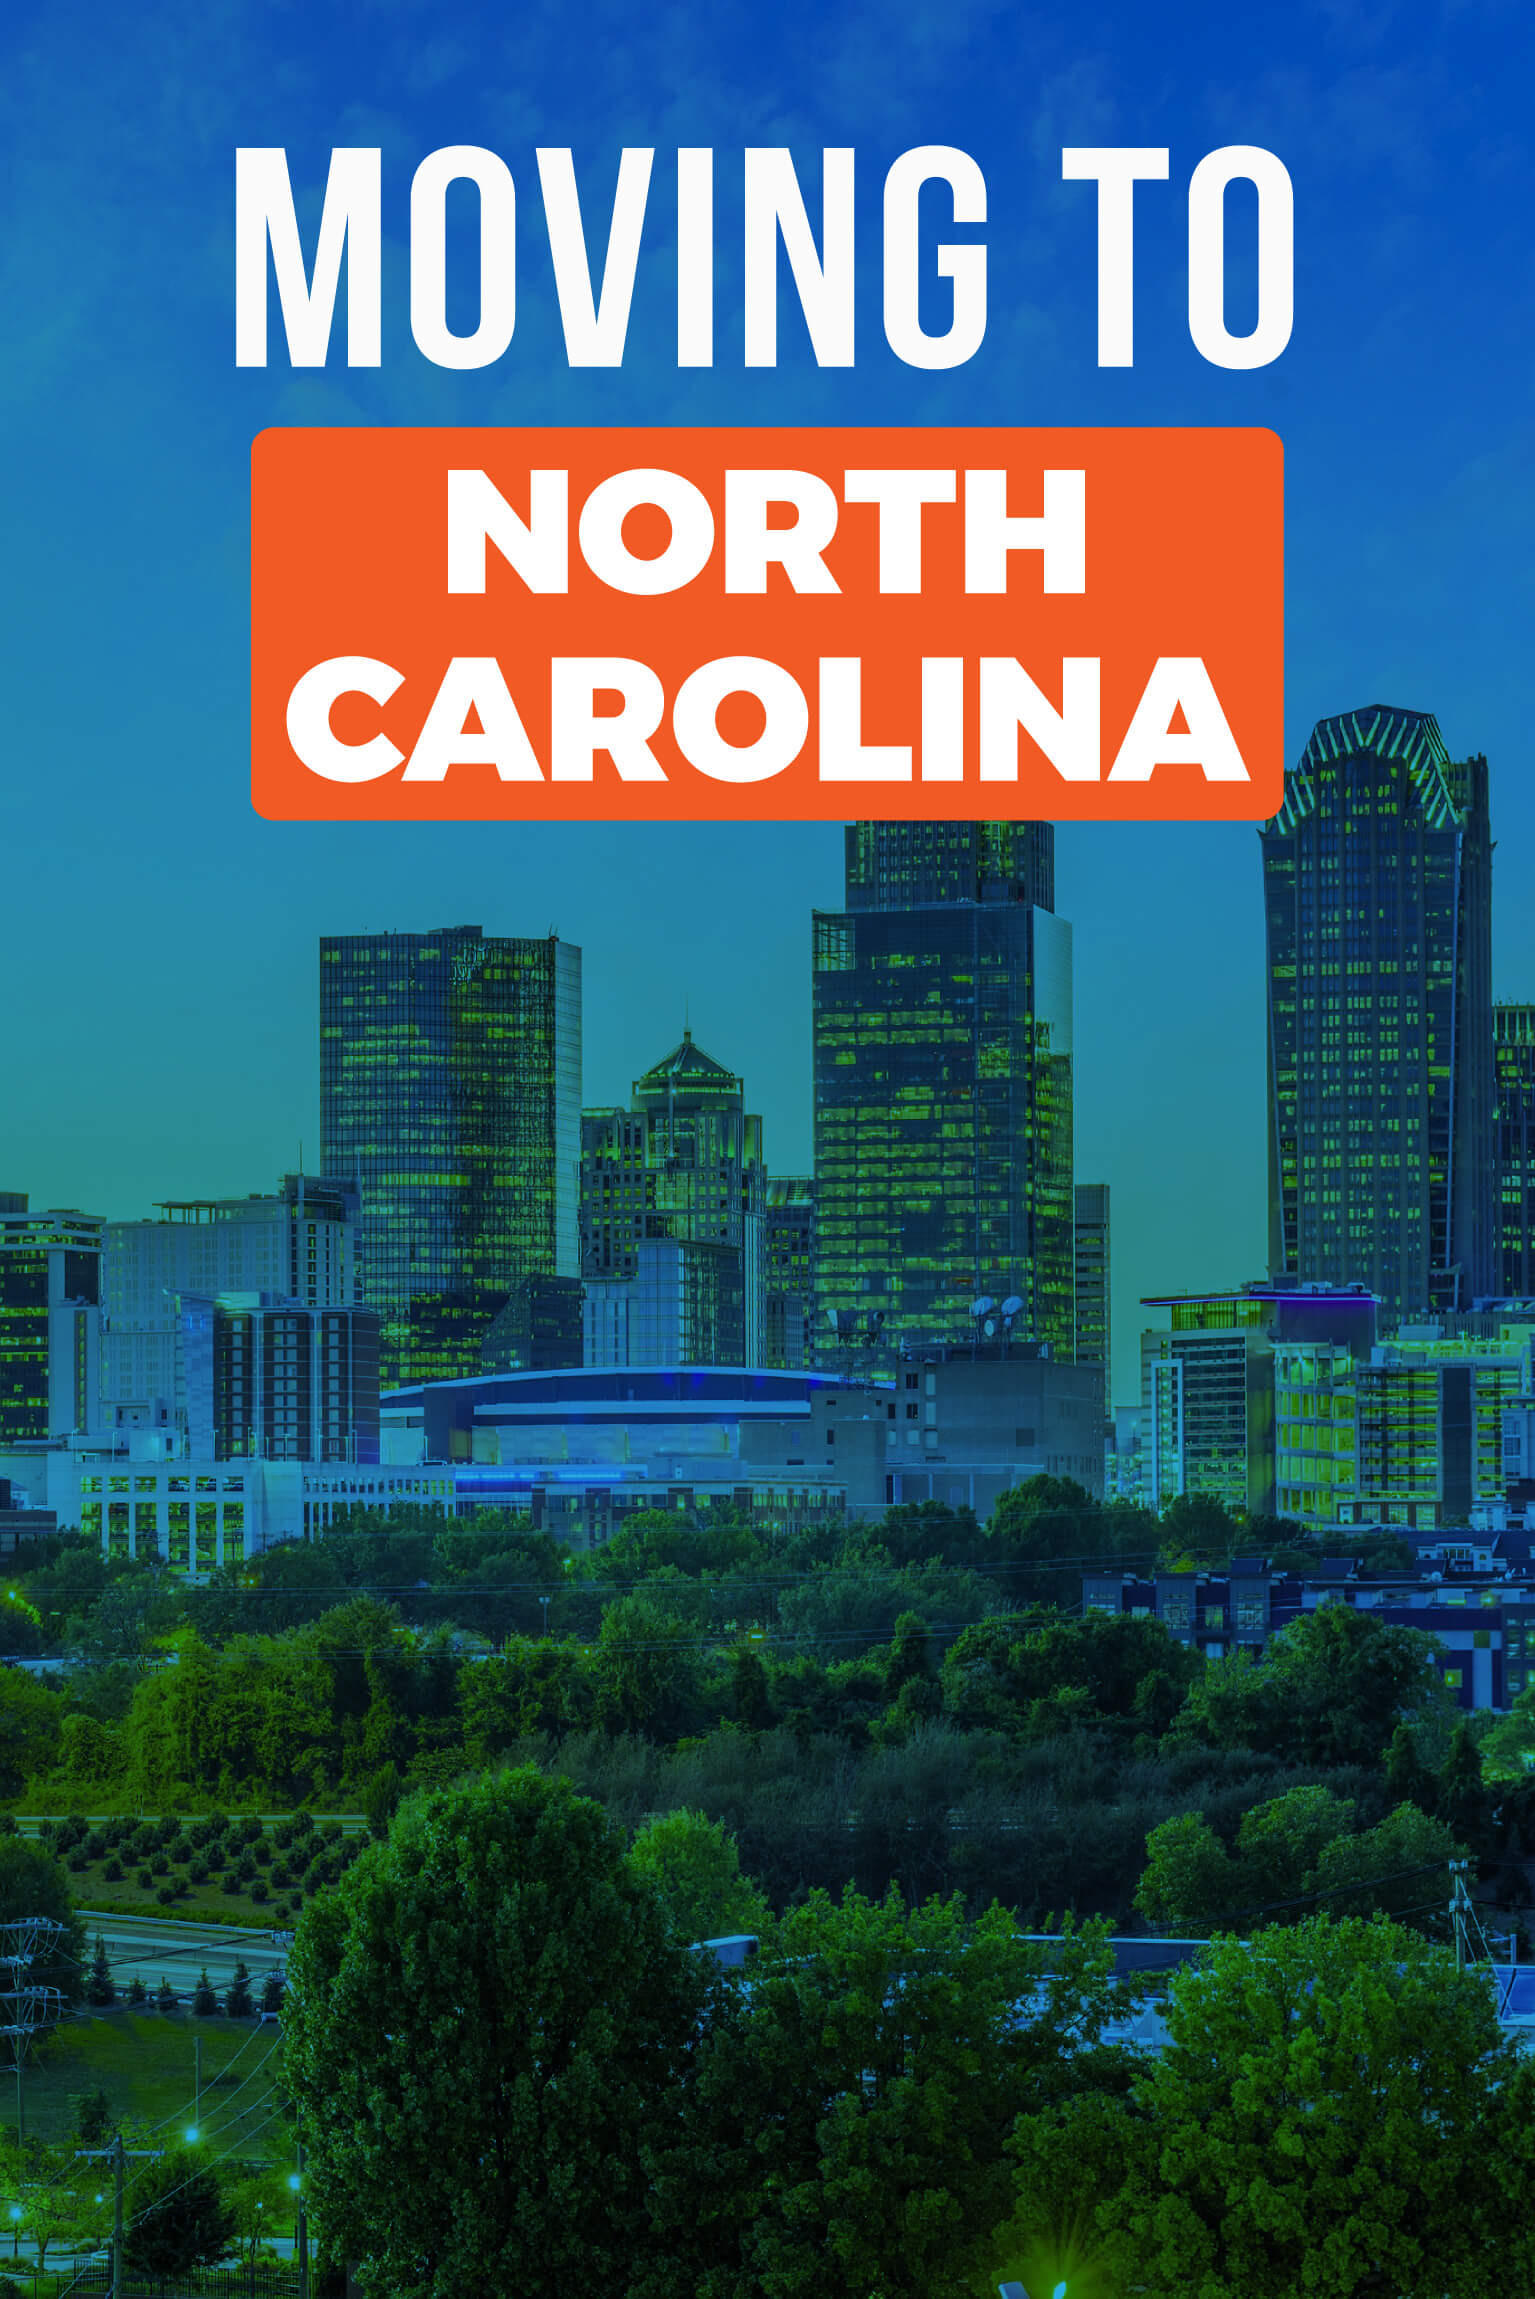 Living in North Carolina - What are the pros and cons of moving to North Carolina?